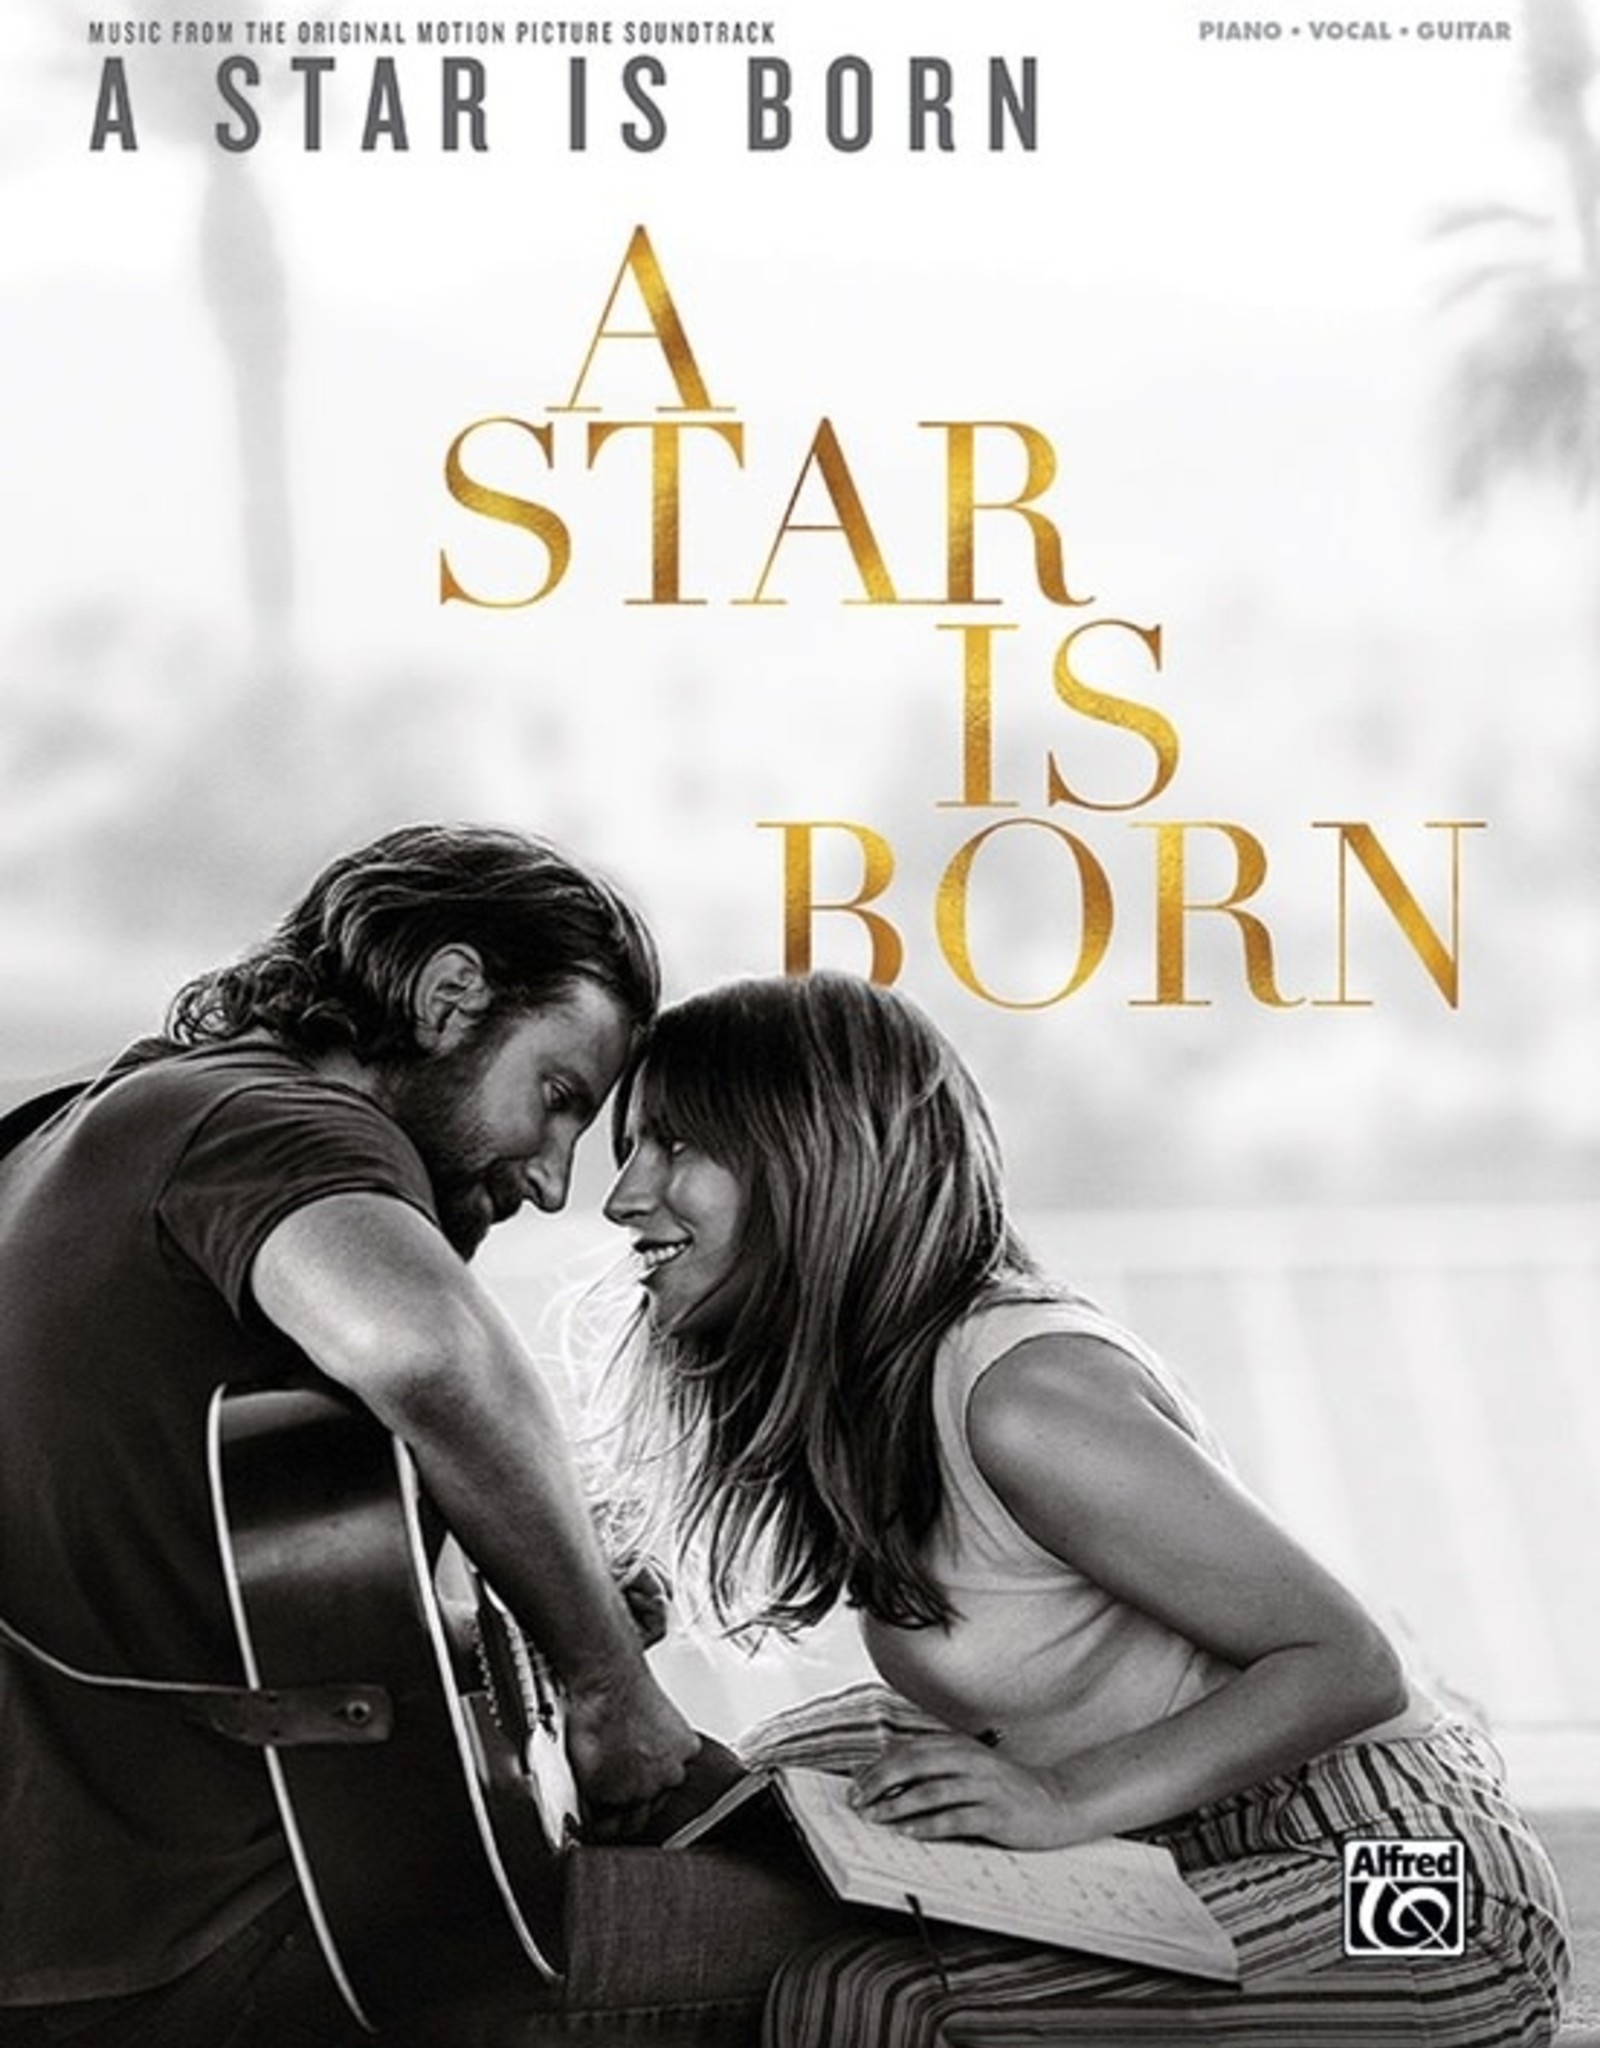 Alfred Star is Born (2018 Movie) PVG